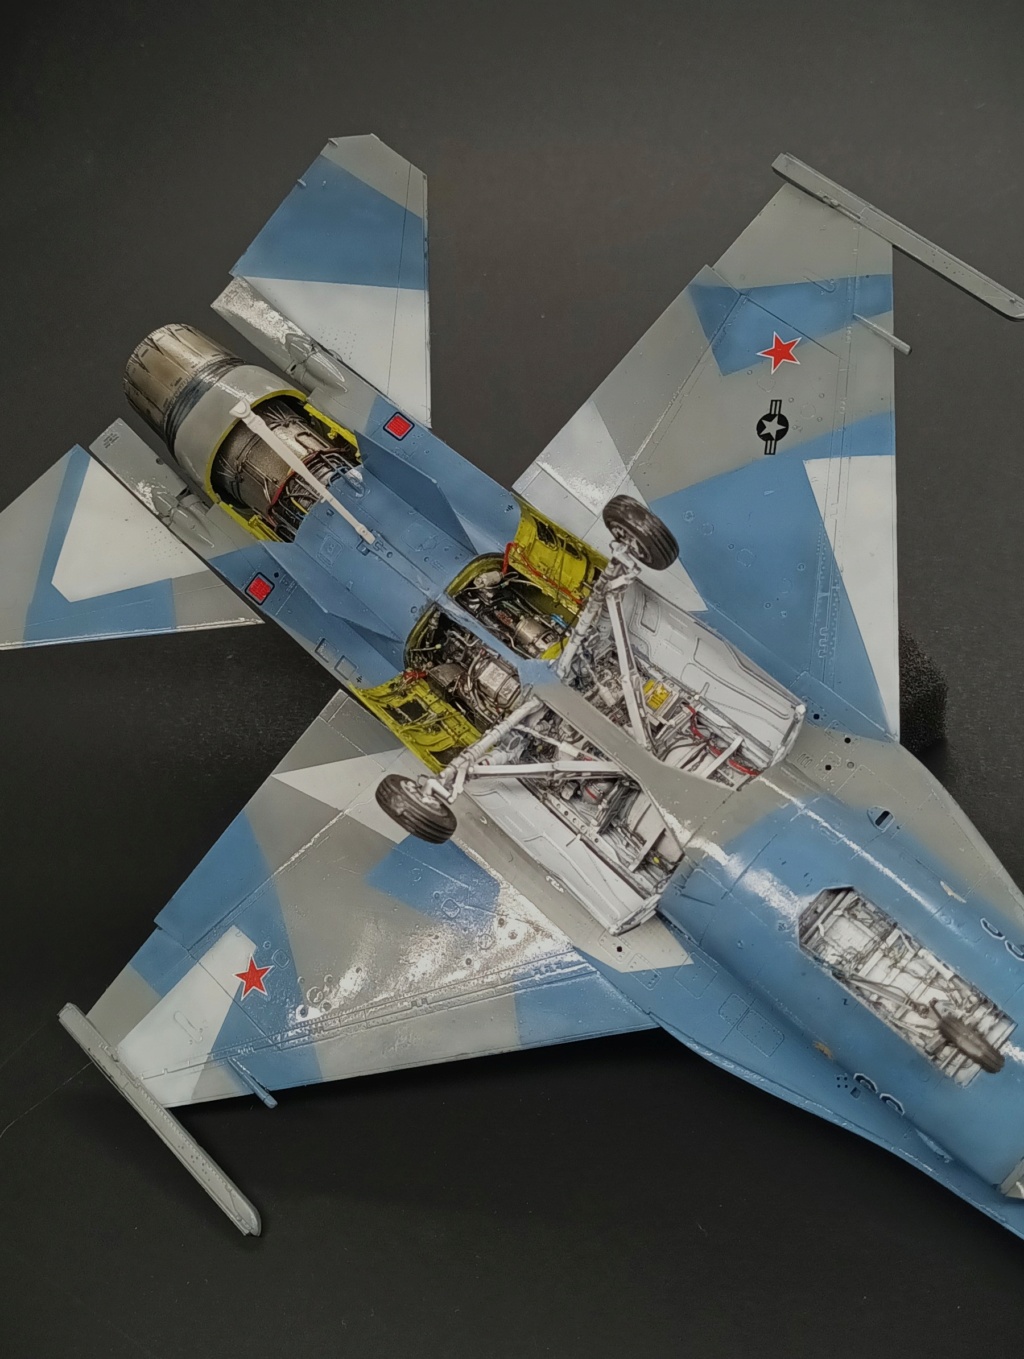 [Kinetic] 1/48  - McDonnell F/A-18A+ Hornet- VFC 12   / Double  [Tamiya] General Dynamics F-16C Fighting Falcon - 64th AGRS  1/48  - Aggressor - Page 4 20240225